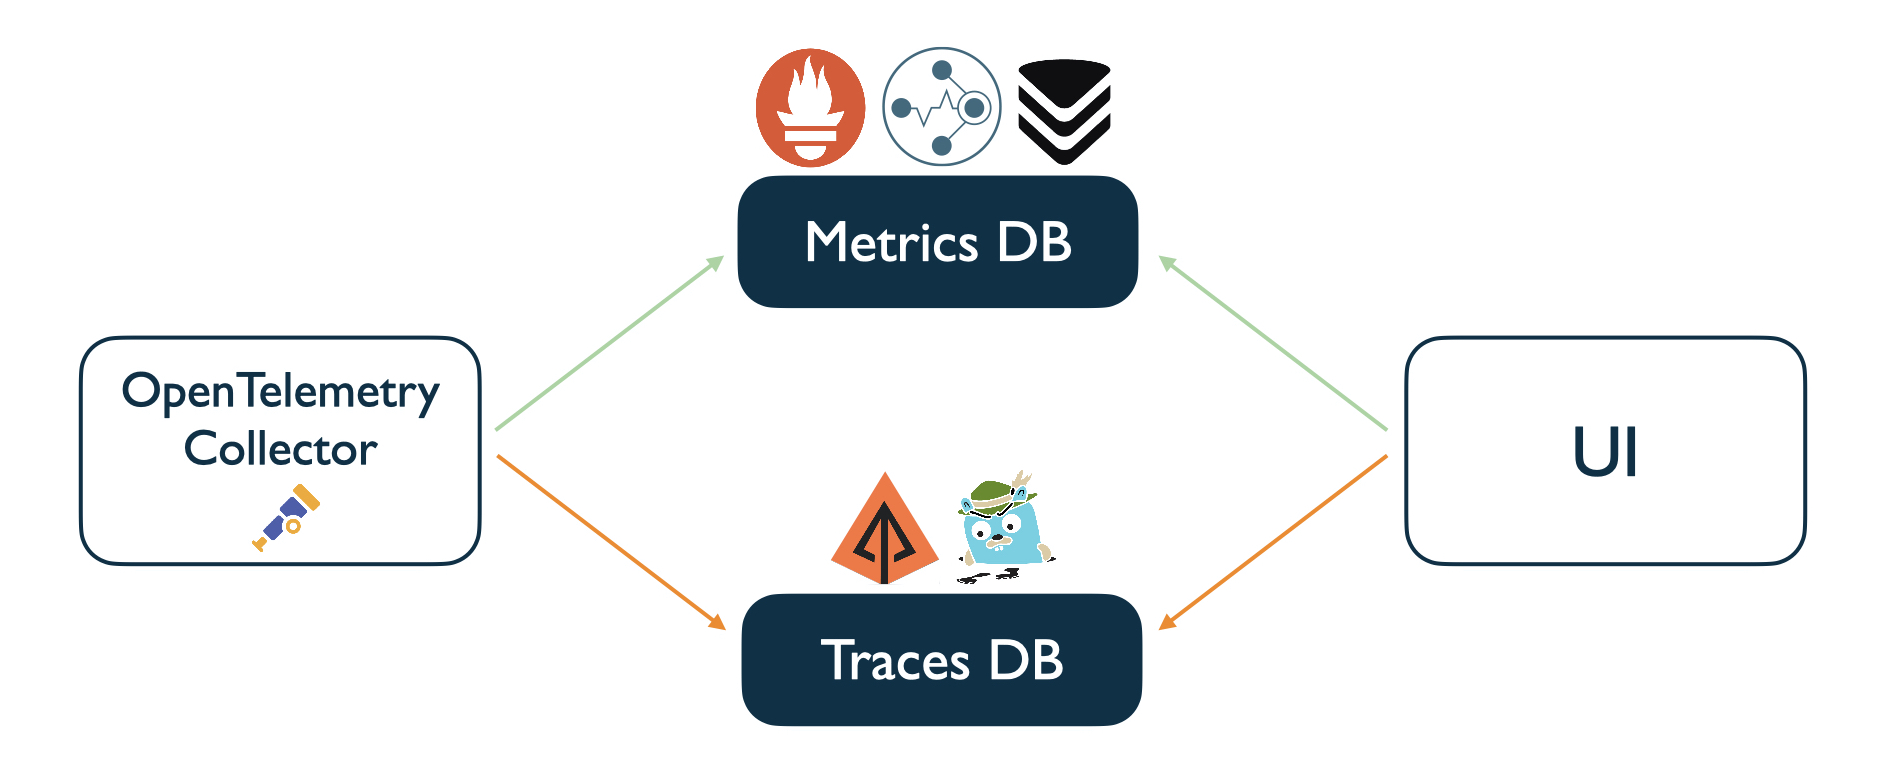 Figure 8.11 Two databases to handle metrics and traces separately